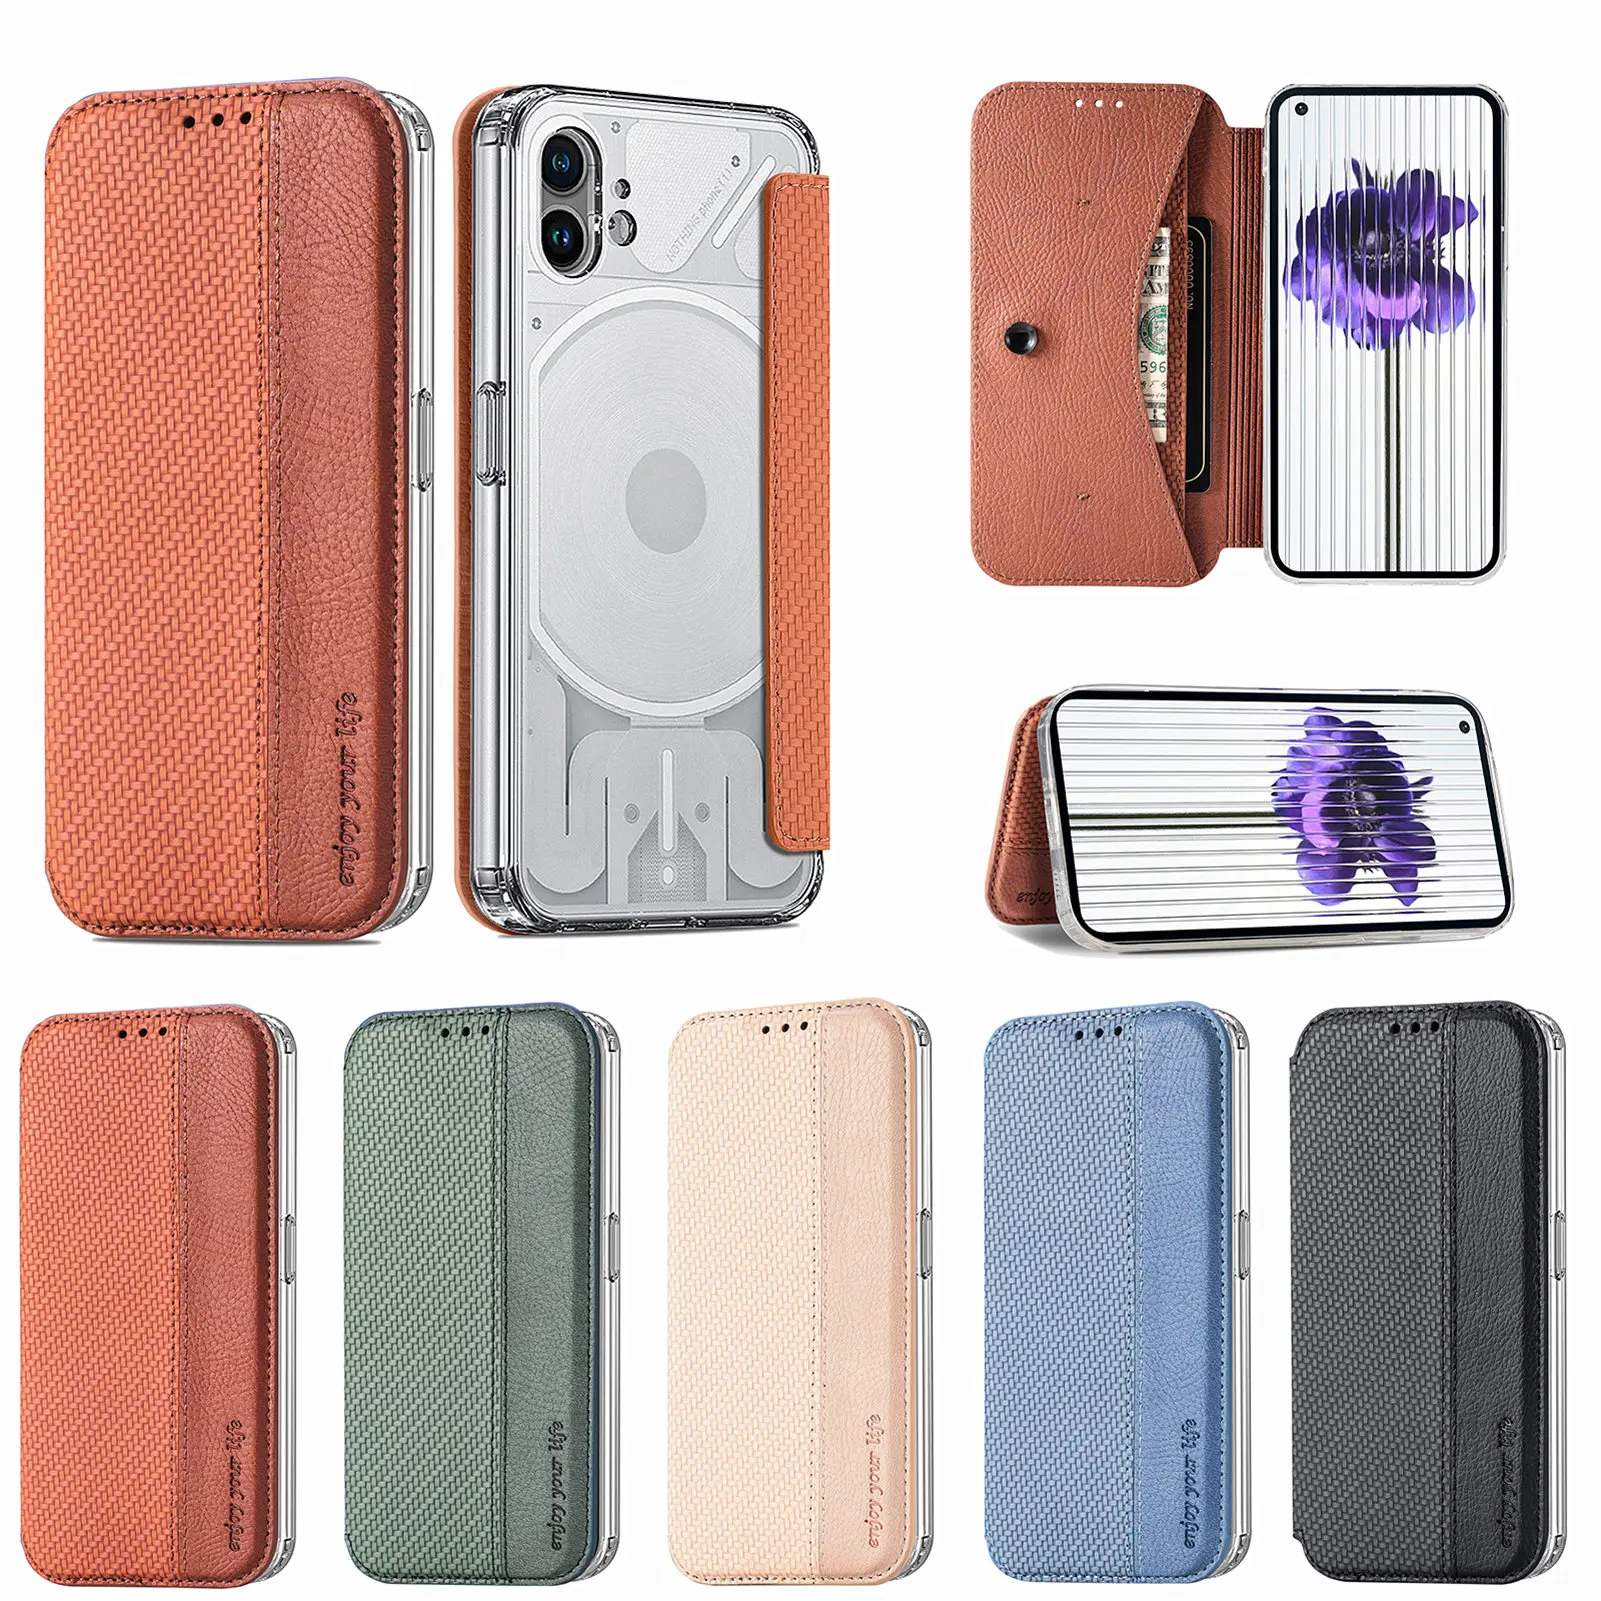 

Fiber Texture Pu Leather Wallet Card Slots Sucker Flip Phone Case For Nothing Phone 1 Soft TPU Bumper Clear Back Cover